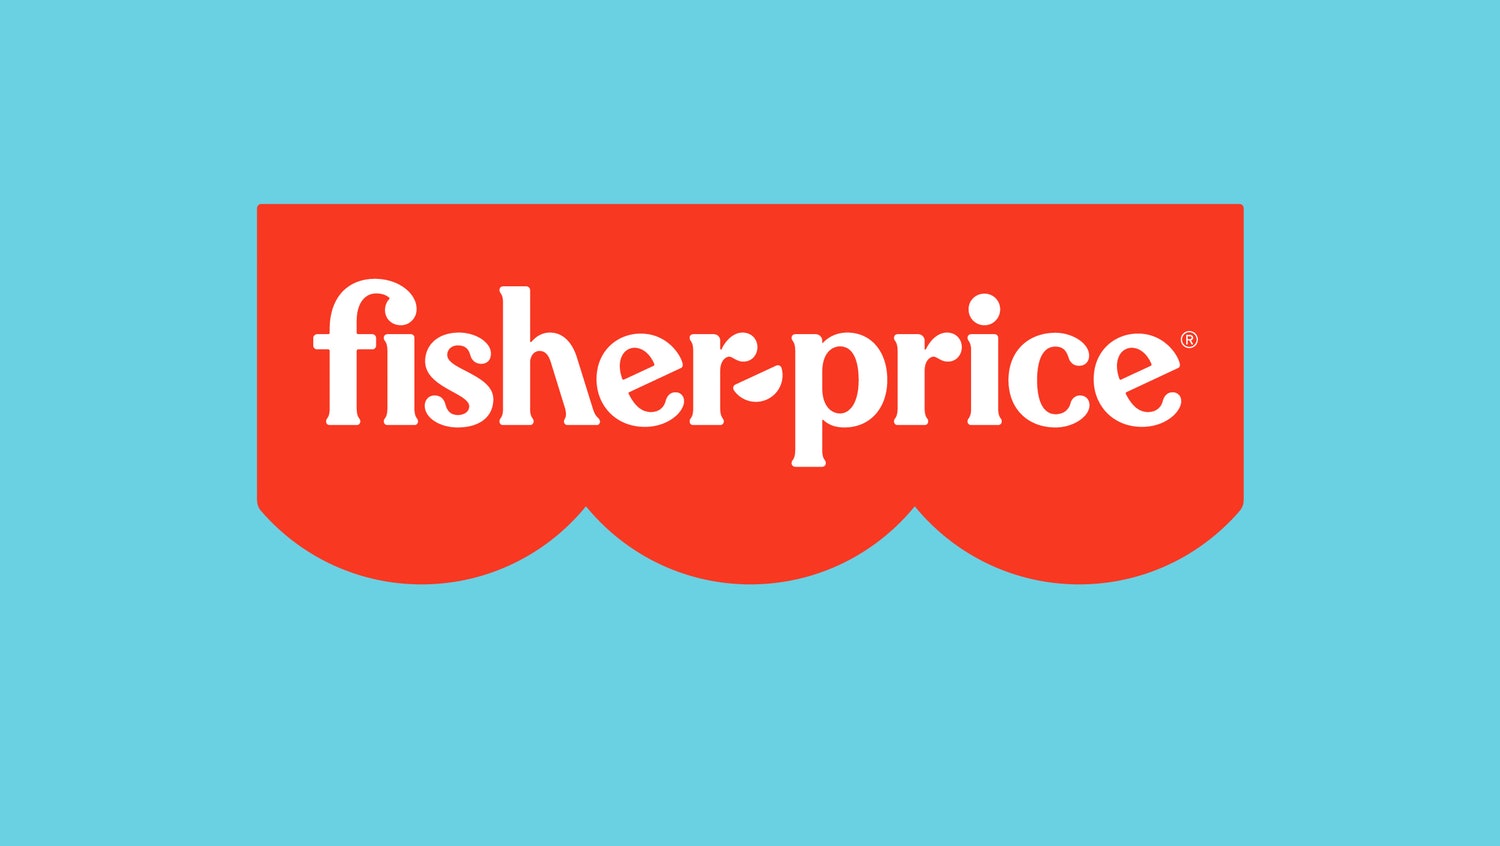 Pentagram Injects Fun And Play Into Fisher-Price Brand Refresh